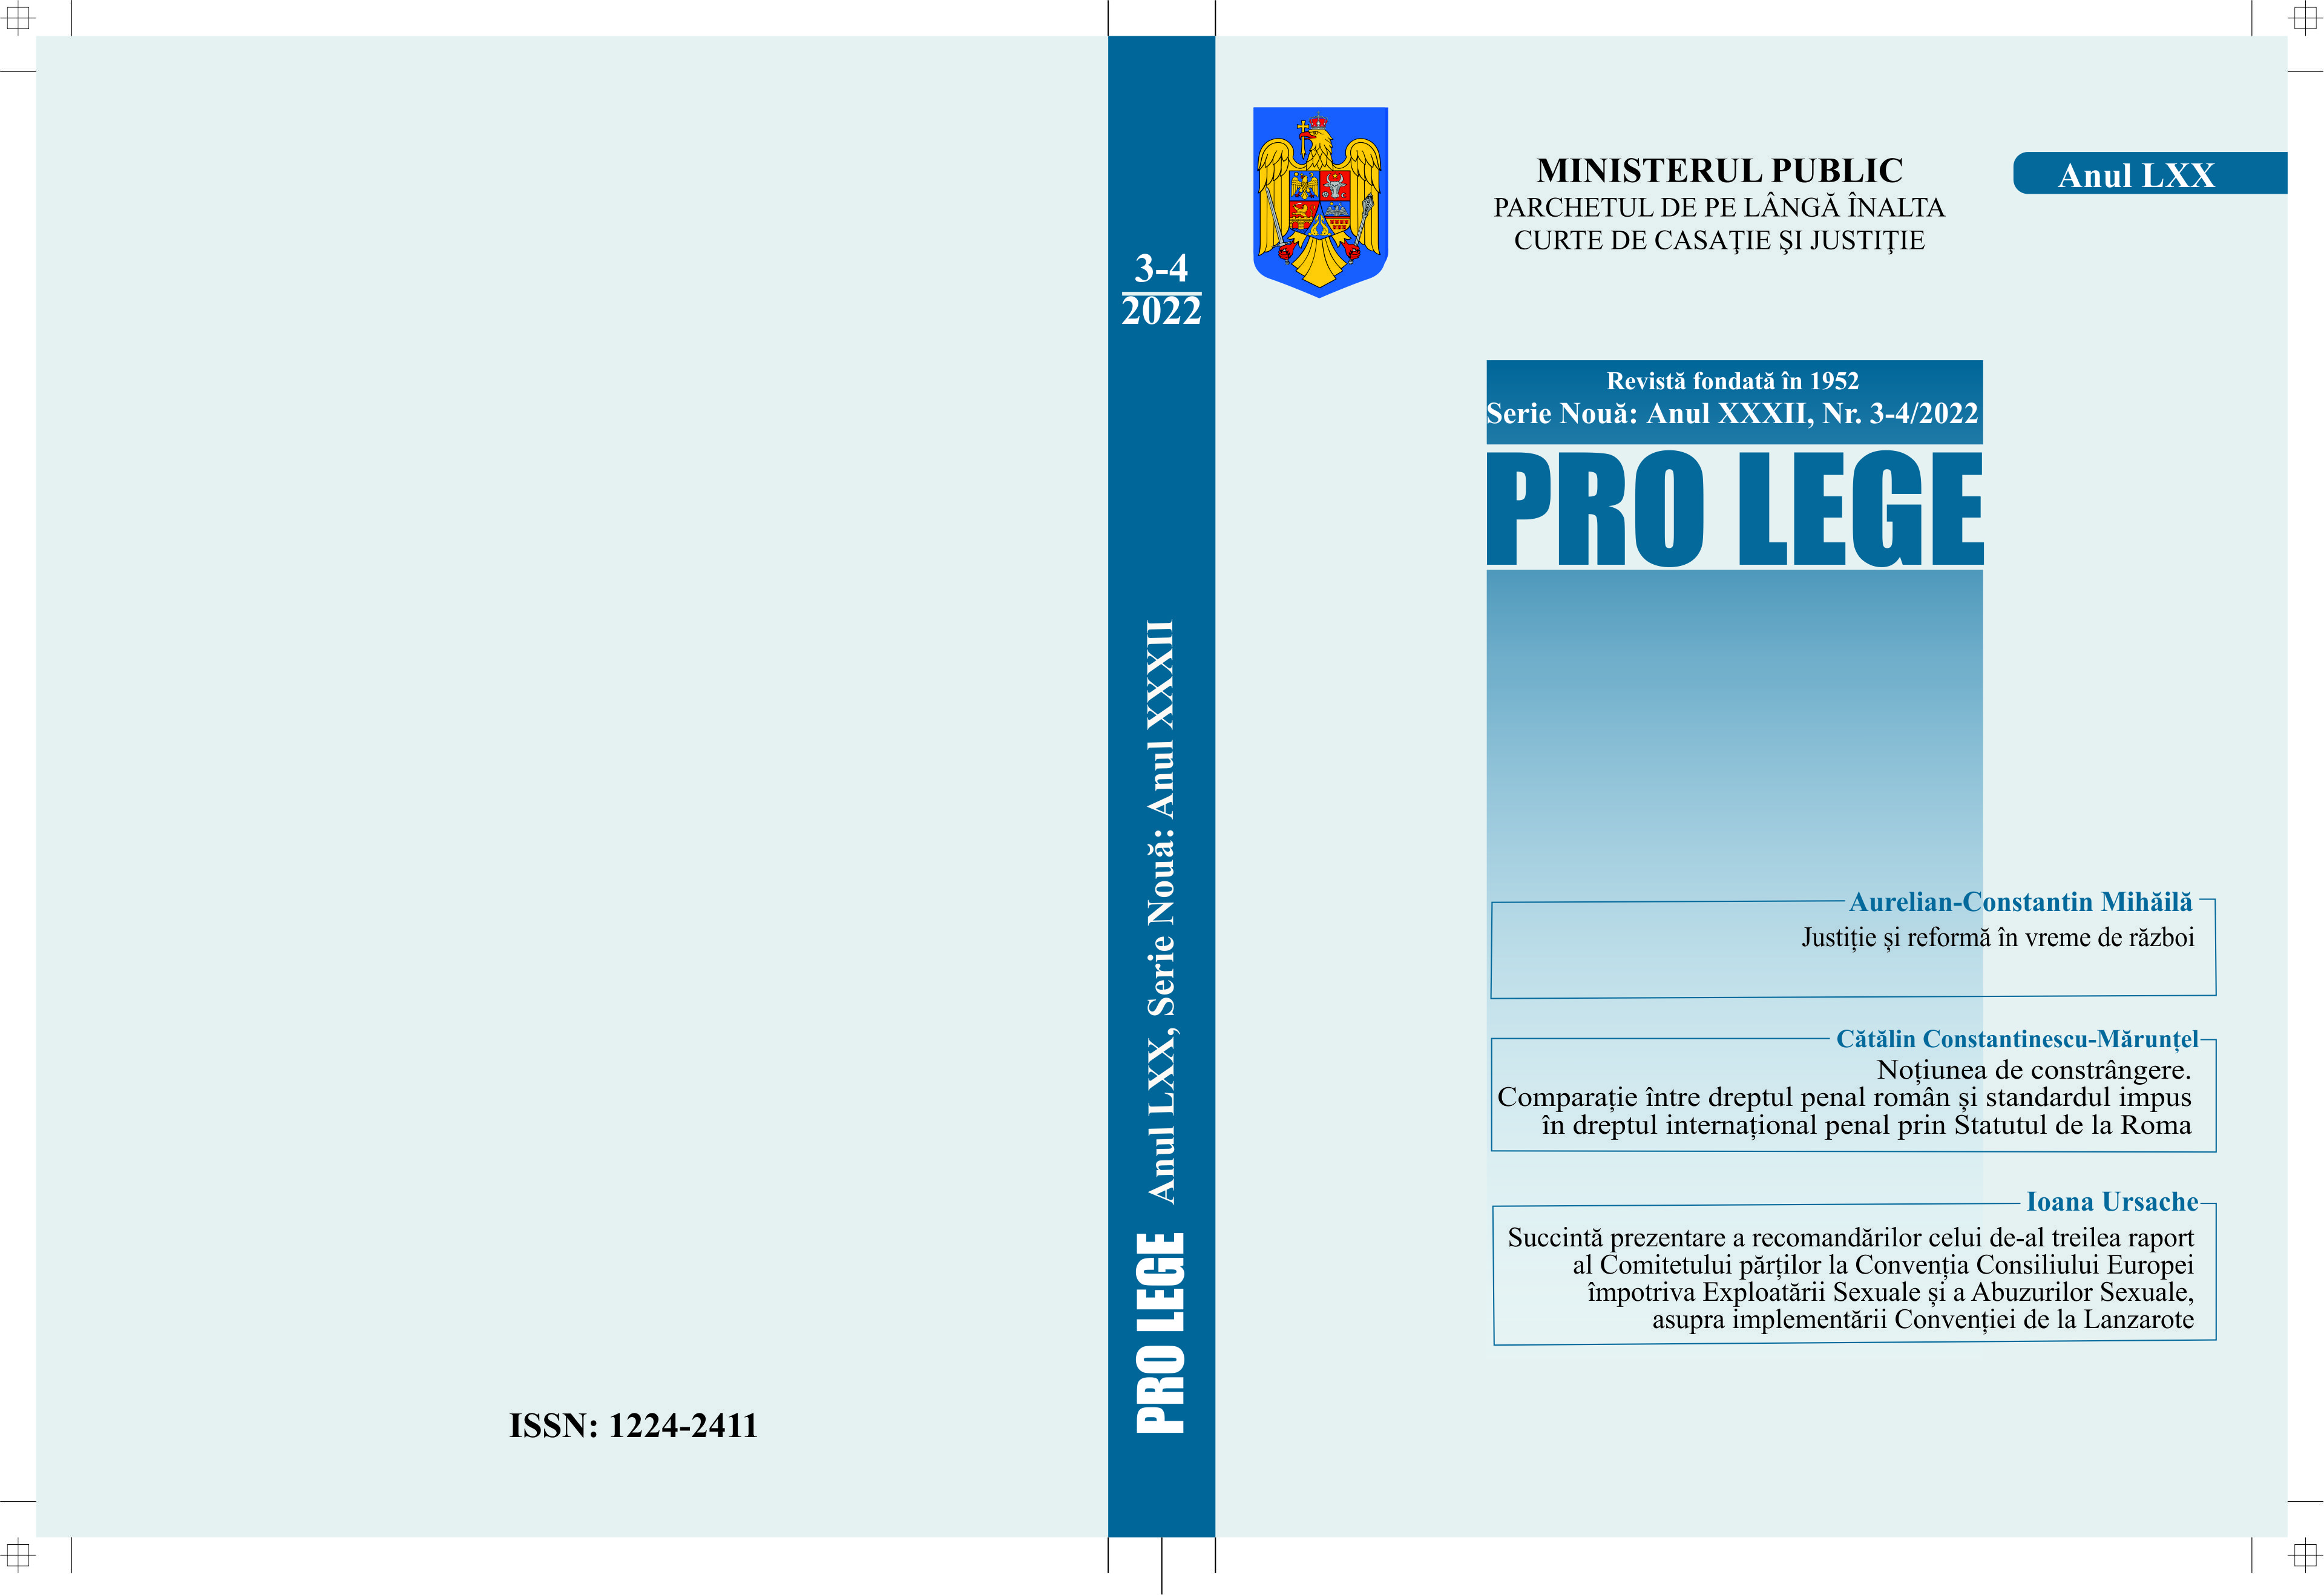 concept of coercion. Comparison between Romanian criminal law and the standard imposed in international criminal law by the Rome Statute Cover Image